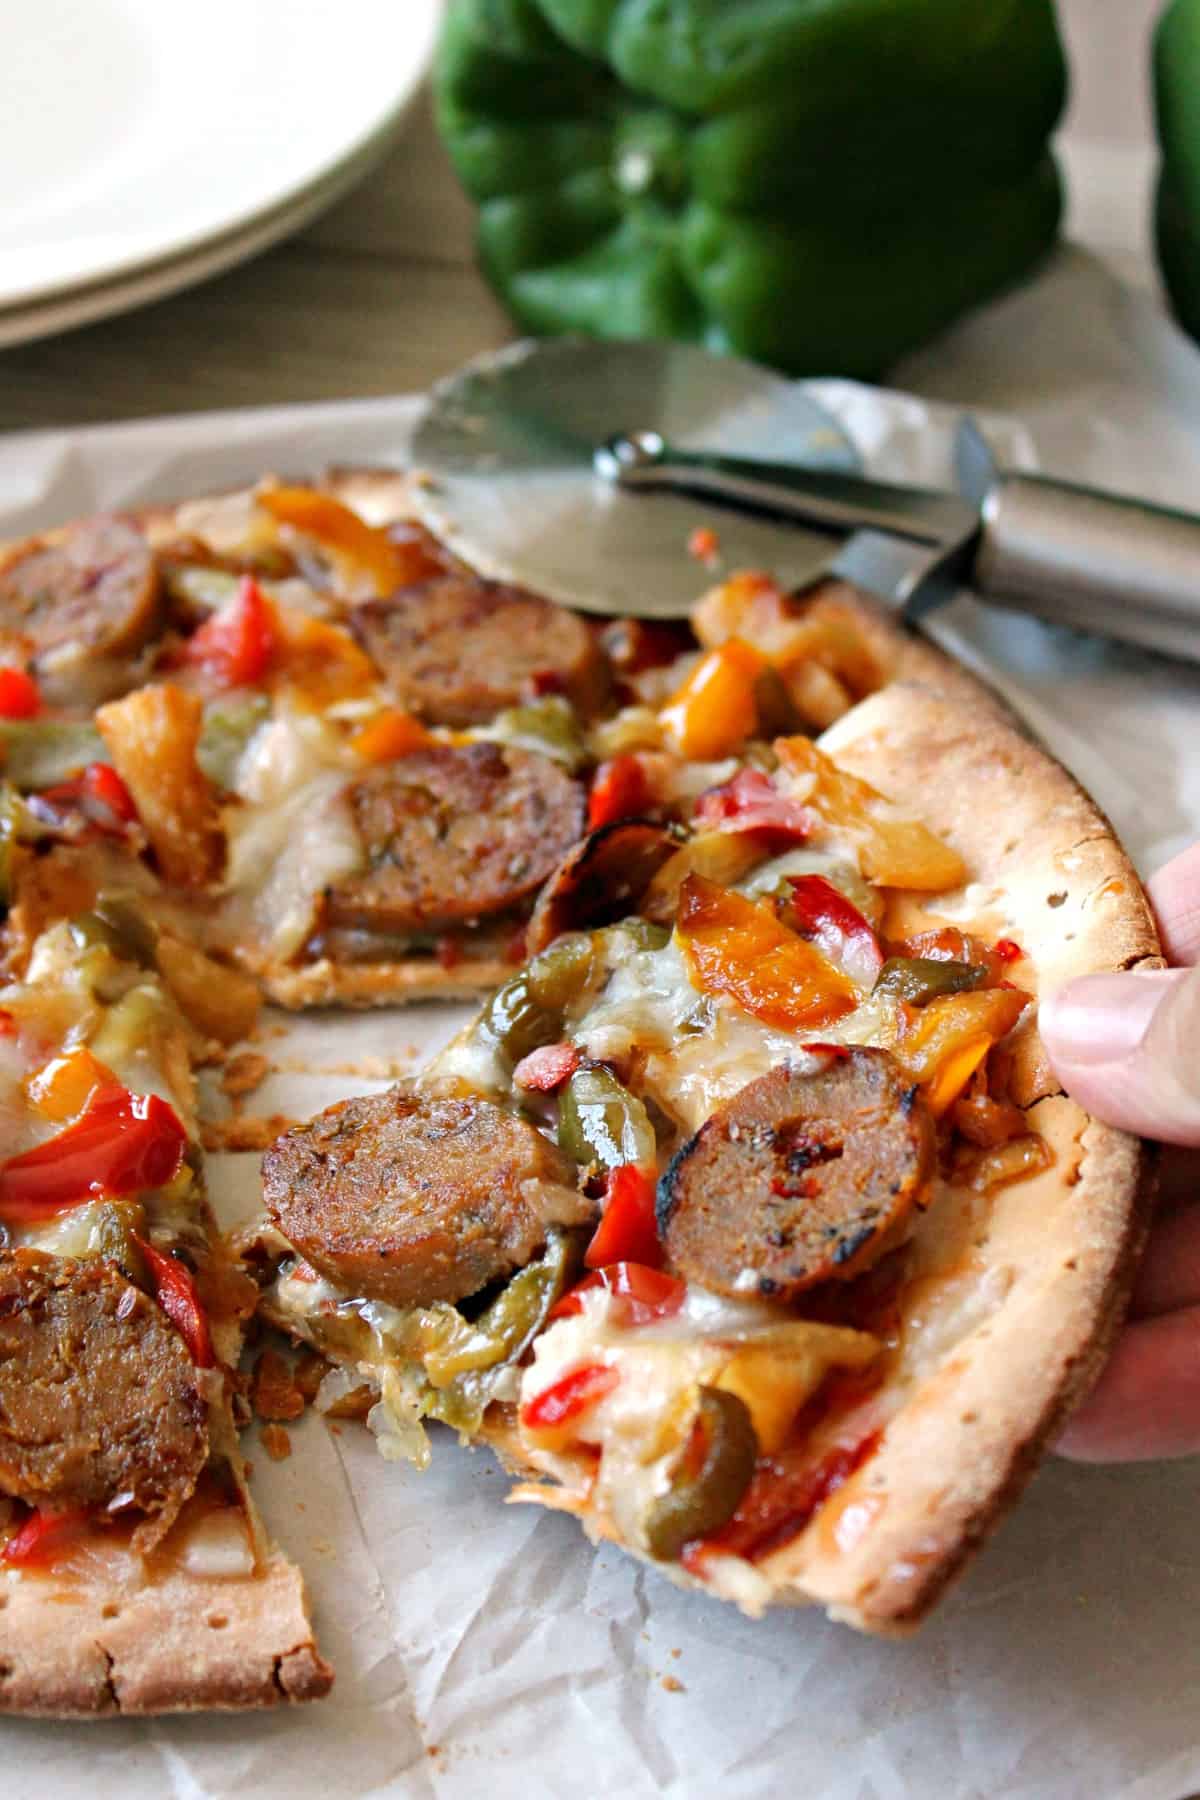 Sausage, Pineapple & Bell Pepper Flatbread. Cancel that pizza order & whip this up in no time; a colorful, sweet and spicy flatbread that will make your taste buds do a hula dance!